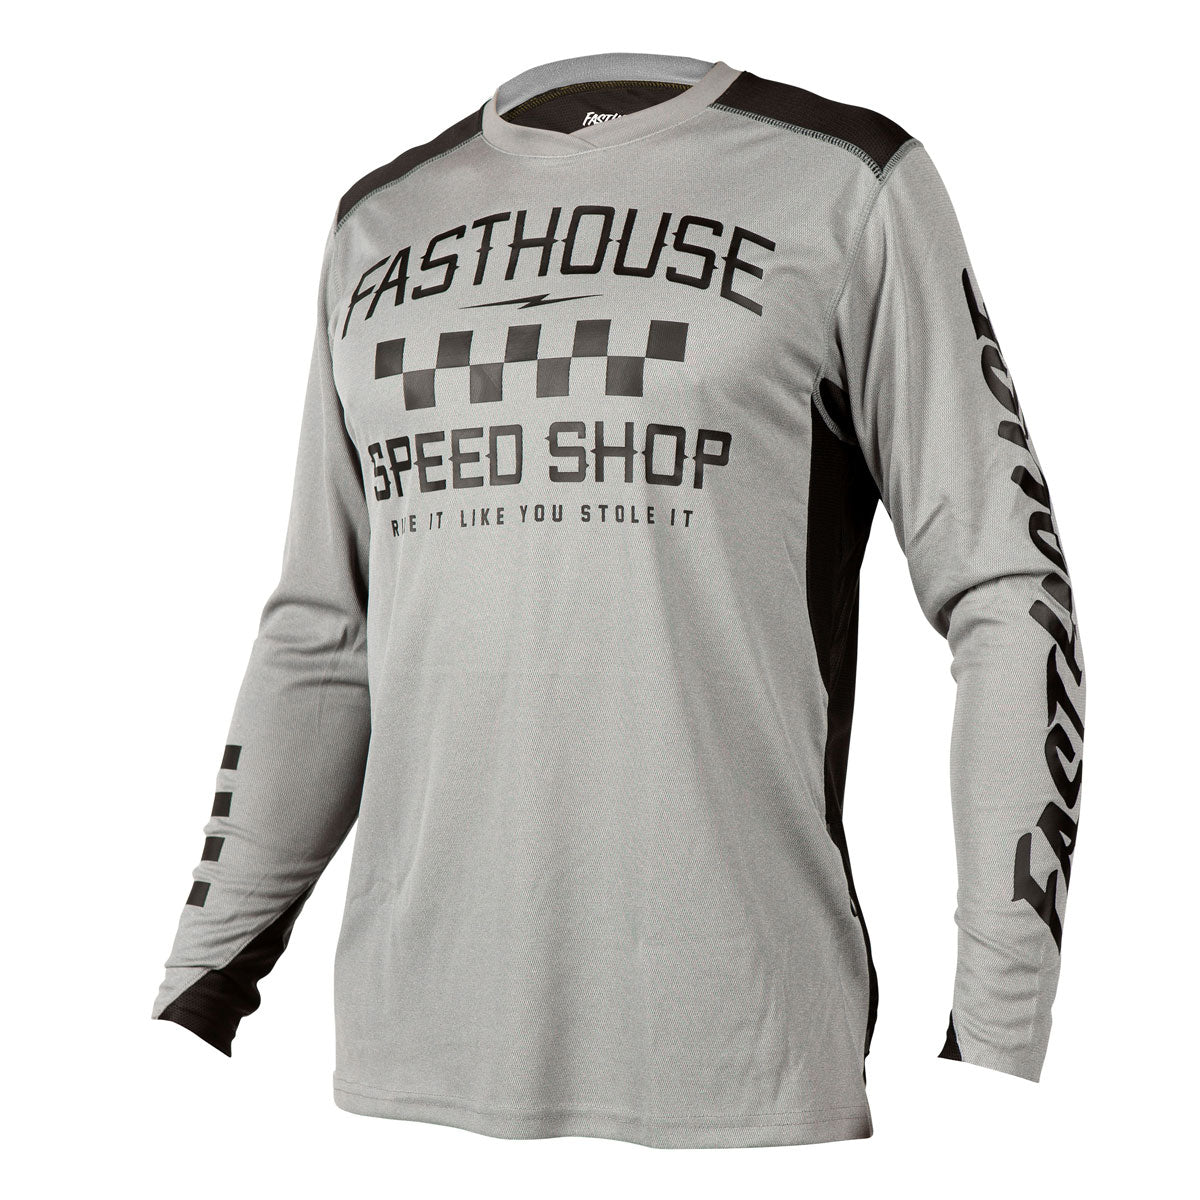 Fasthouse Alloy Roam Jersey Grey Front